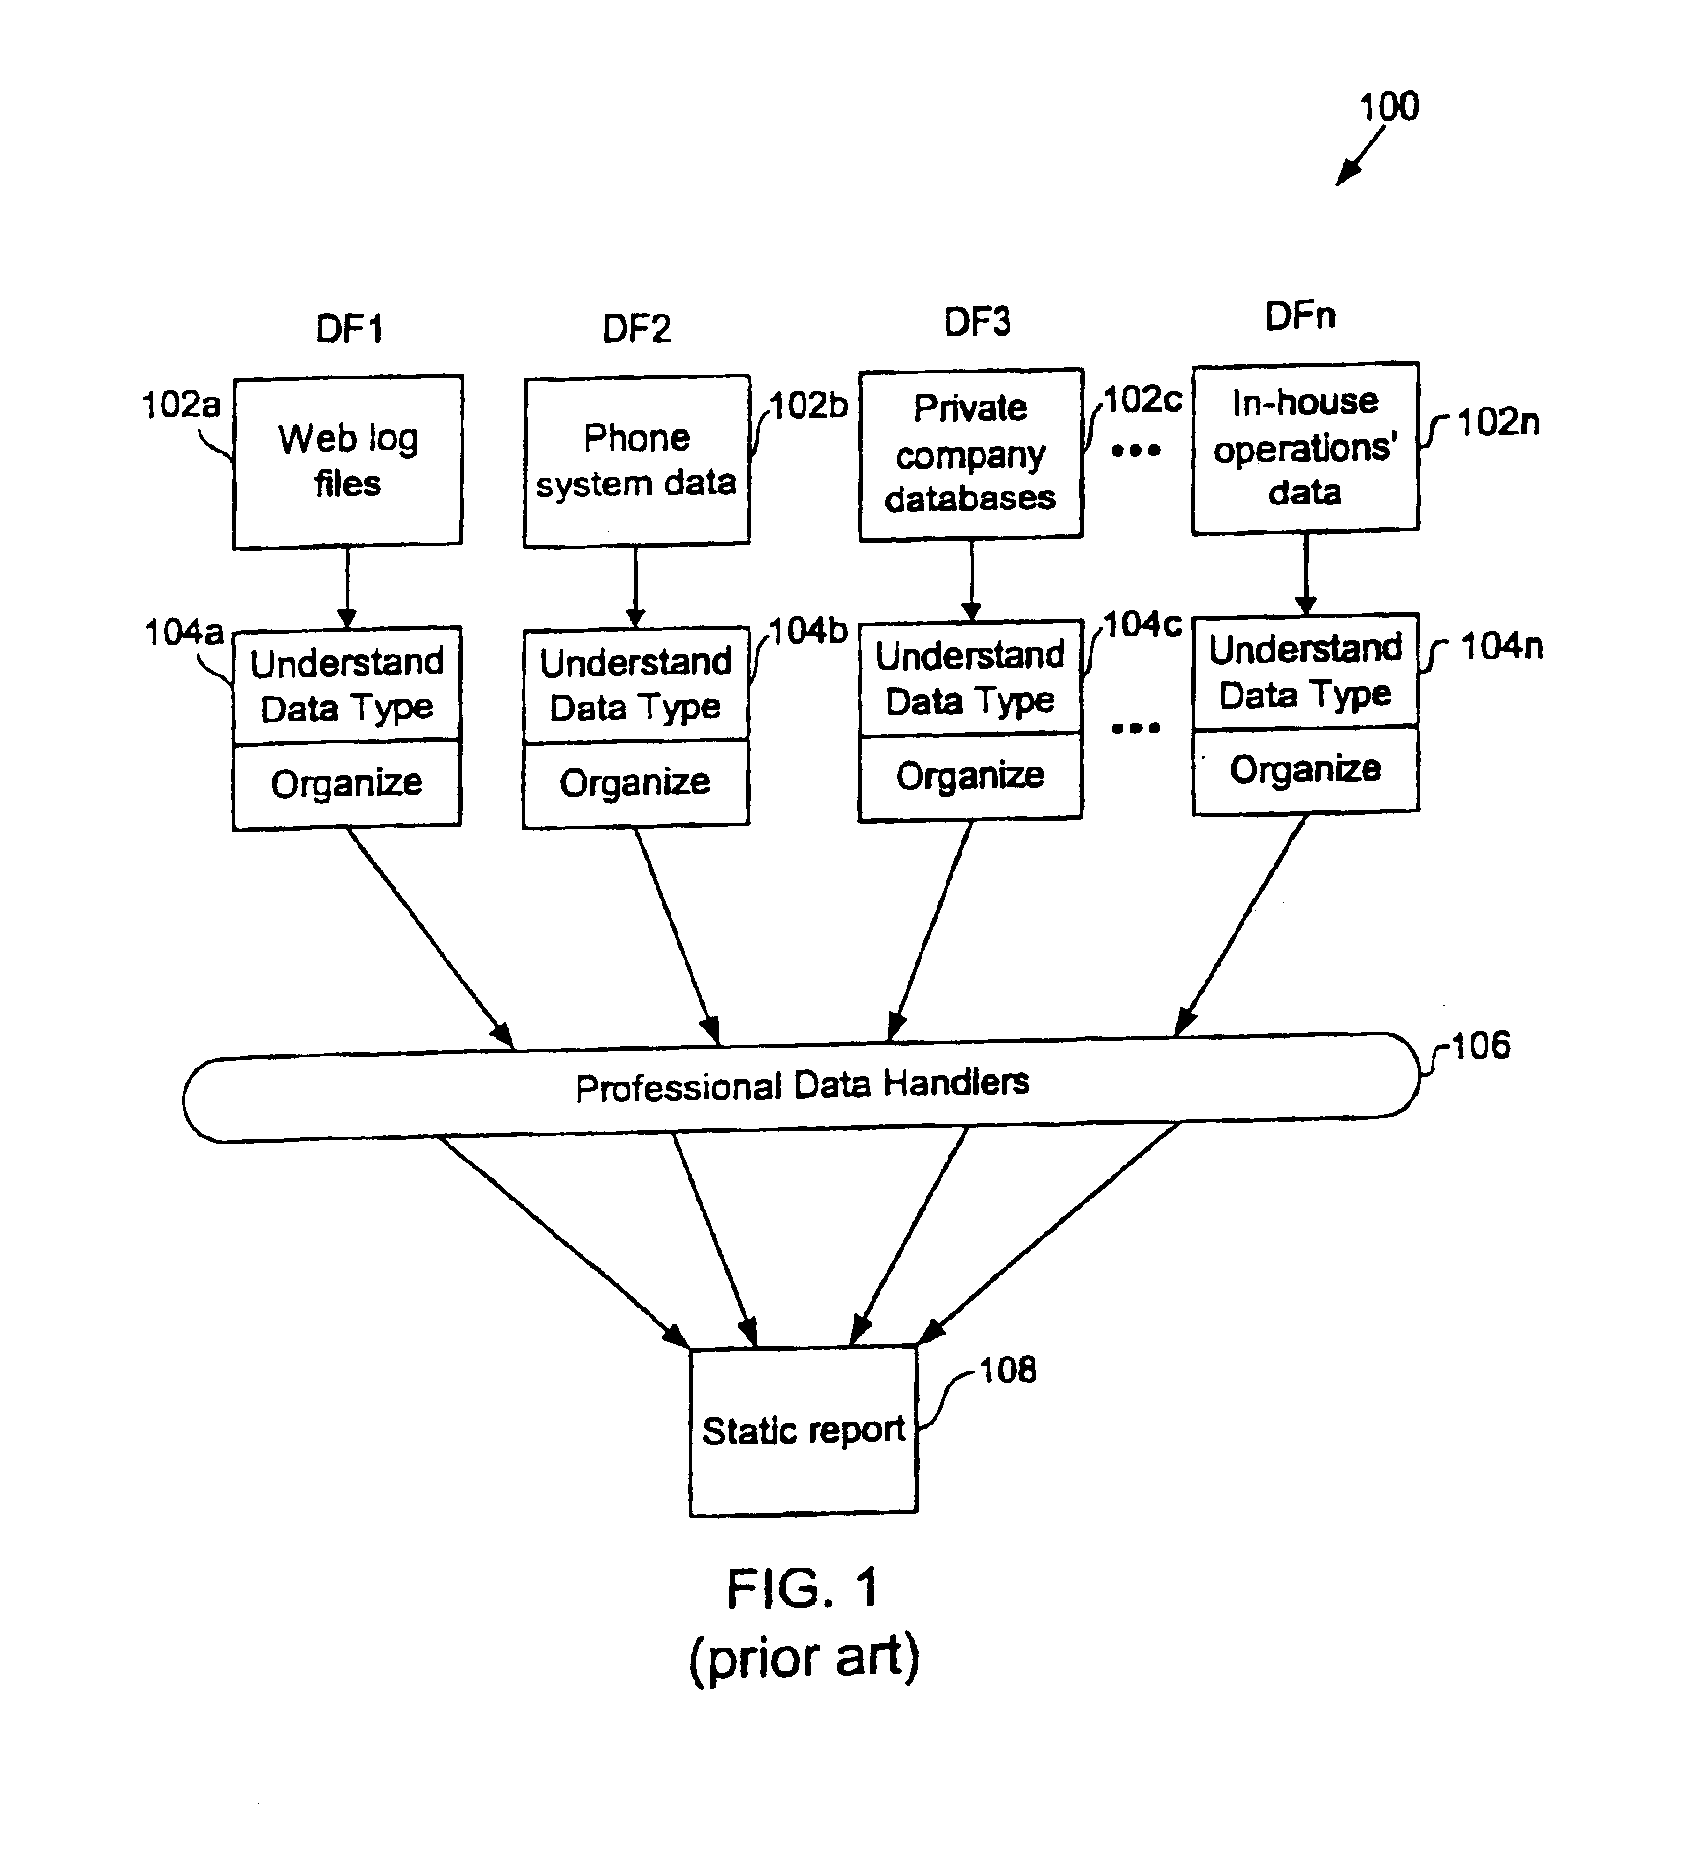 Methods for dynamically accessing, processing, and presenting data acquired from disparate data sources